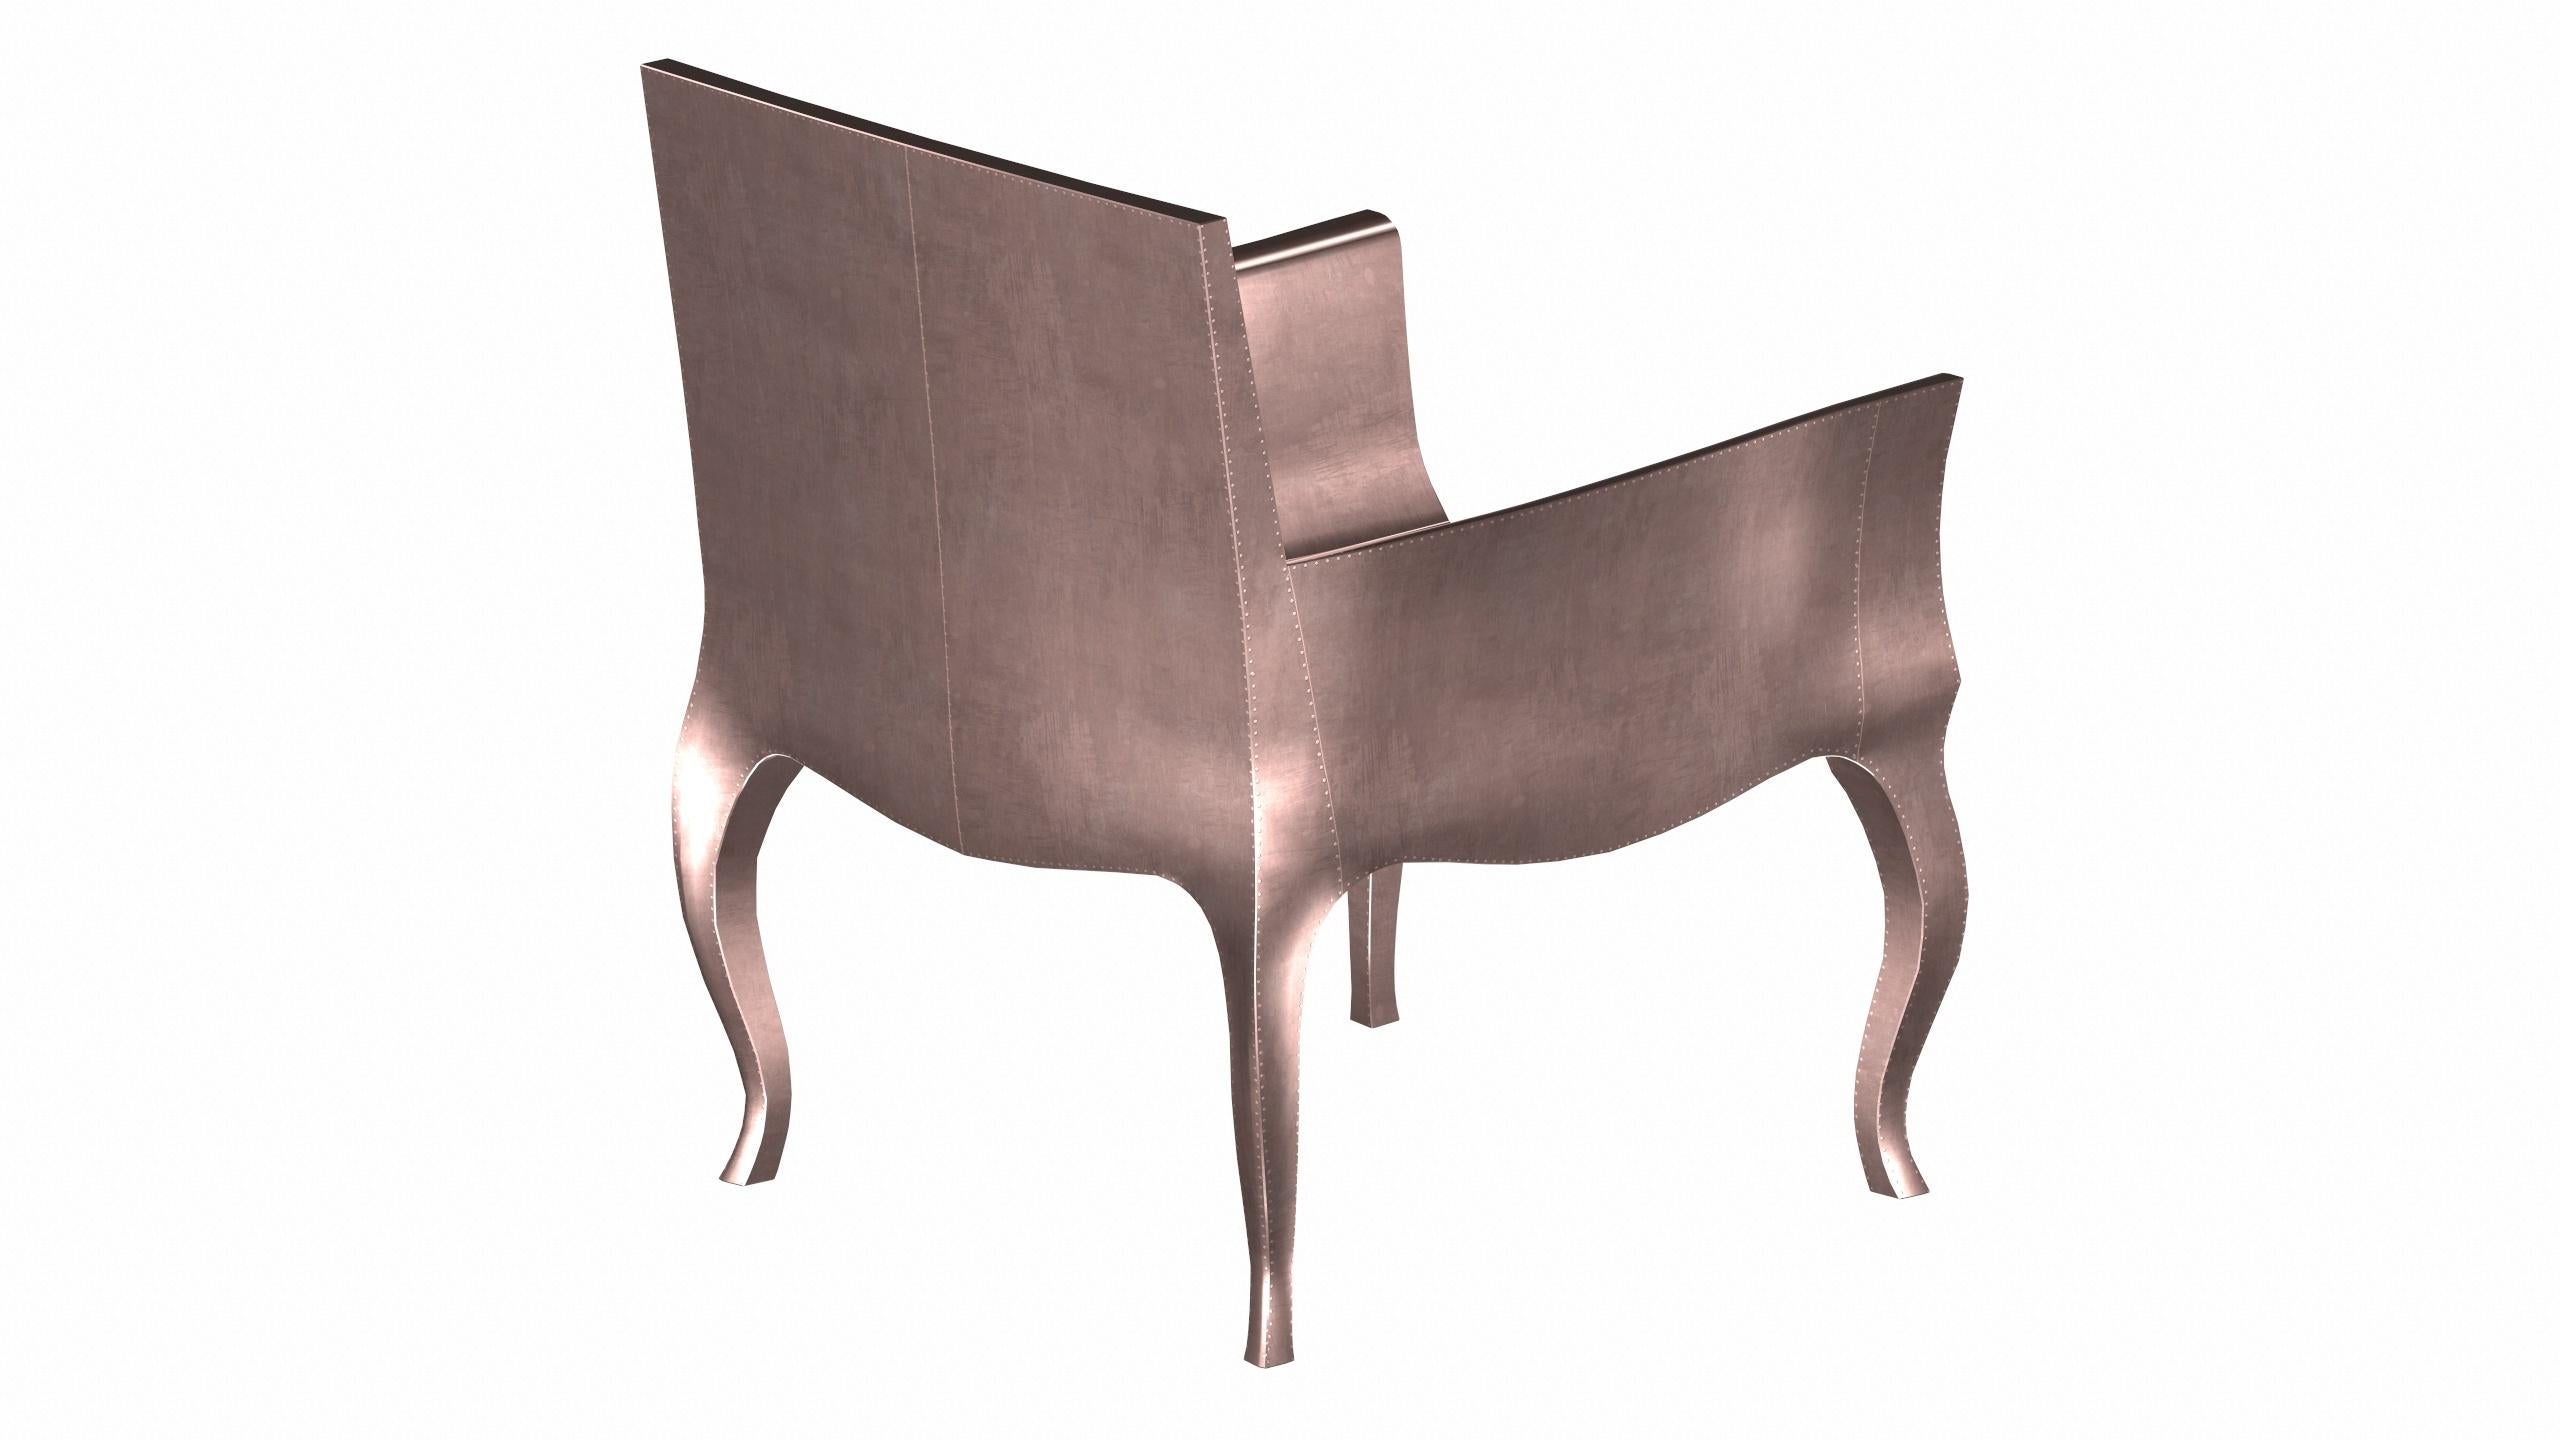 Indian Art Nouveau Chairs in Smooth Copper by Paul Mathieu for S. Odegard For Sale